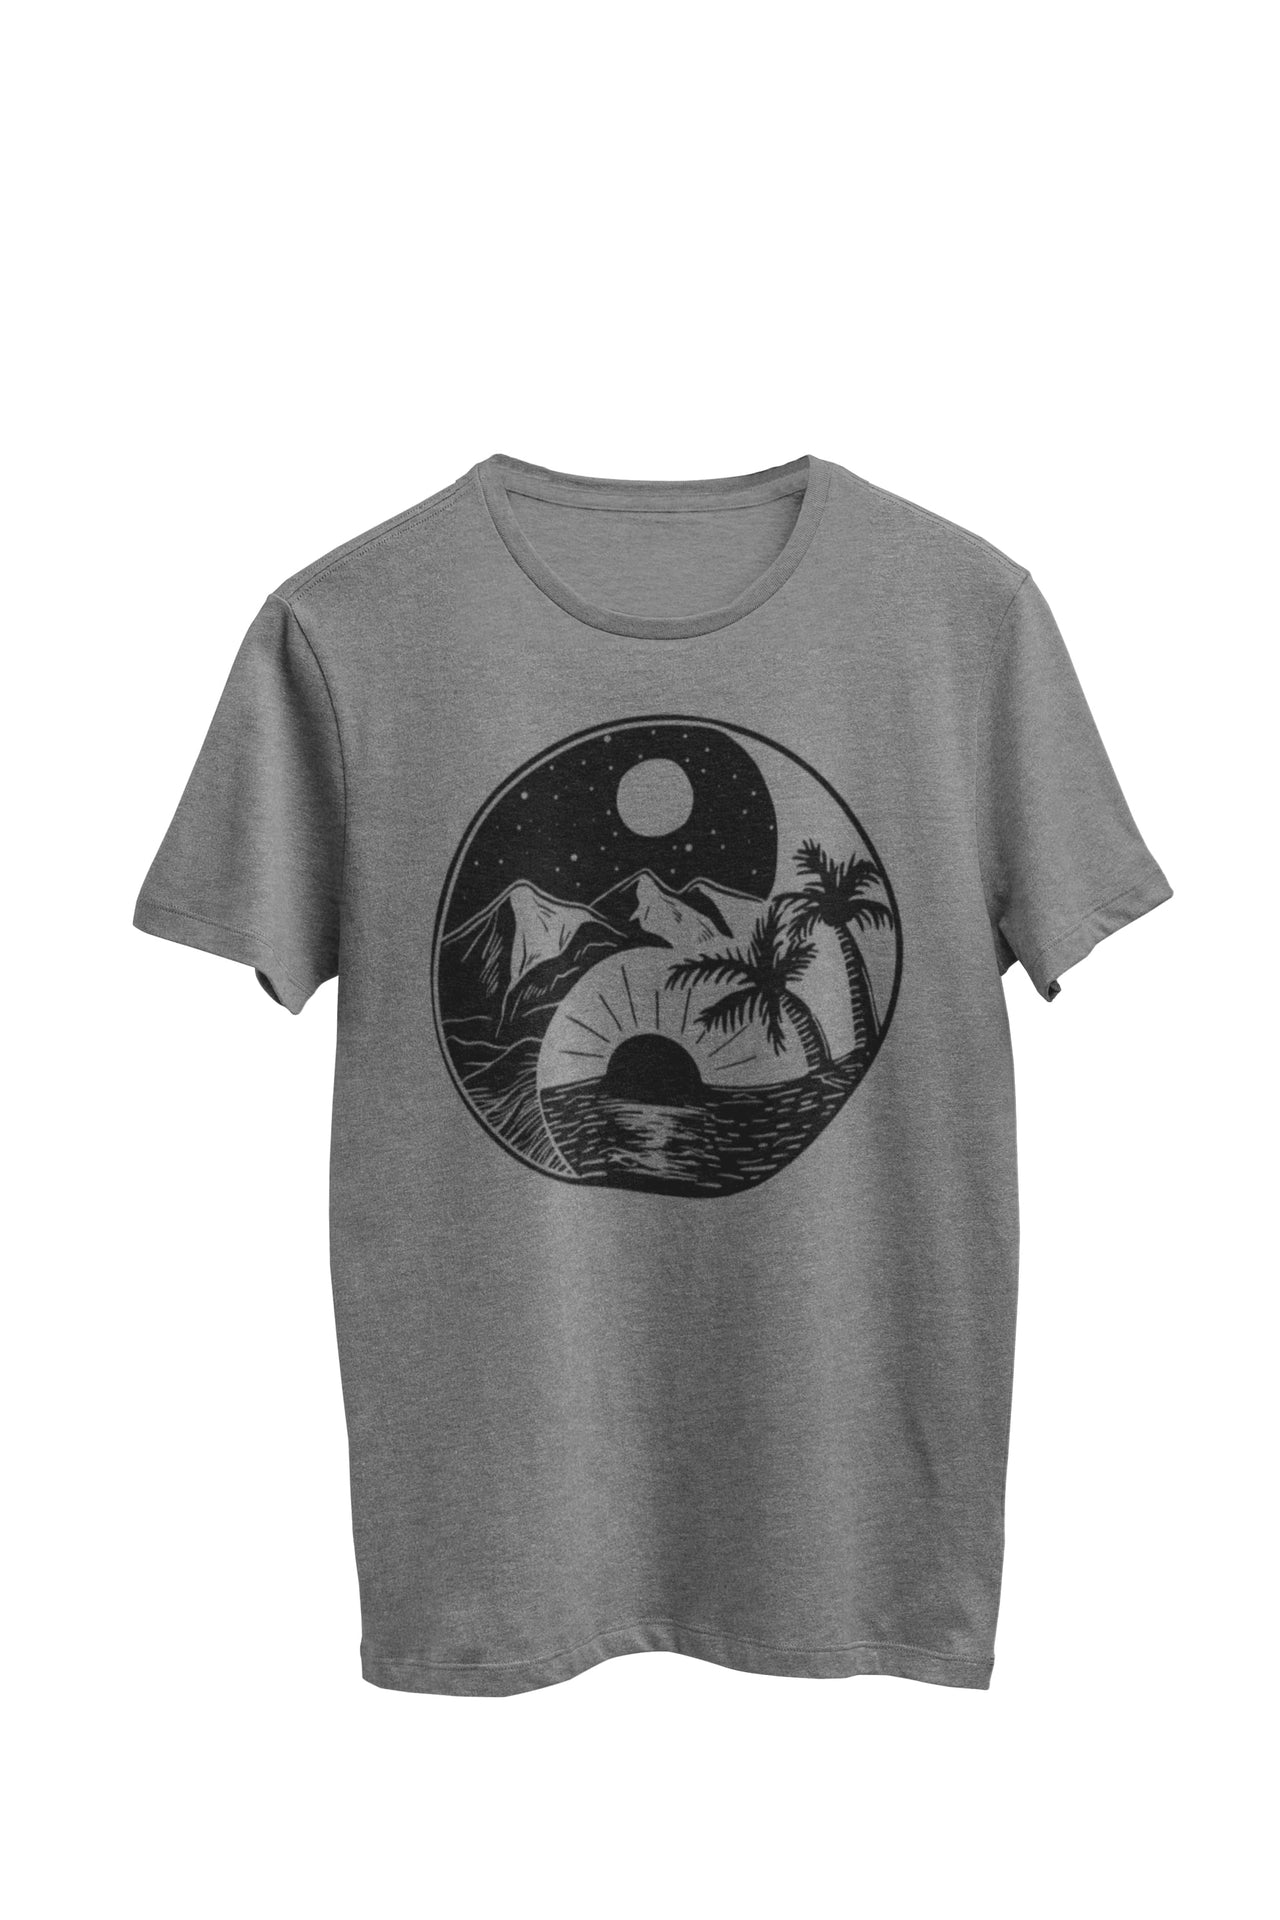 Gray heather unisex t-shirt featuring a dual-season design: a summer ocean view on one side and a winter mountain on the other, both encompassing a Yin/Yang symbol. Designed by WooHoo Apparel.